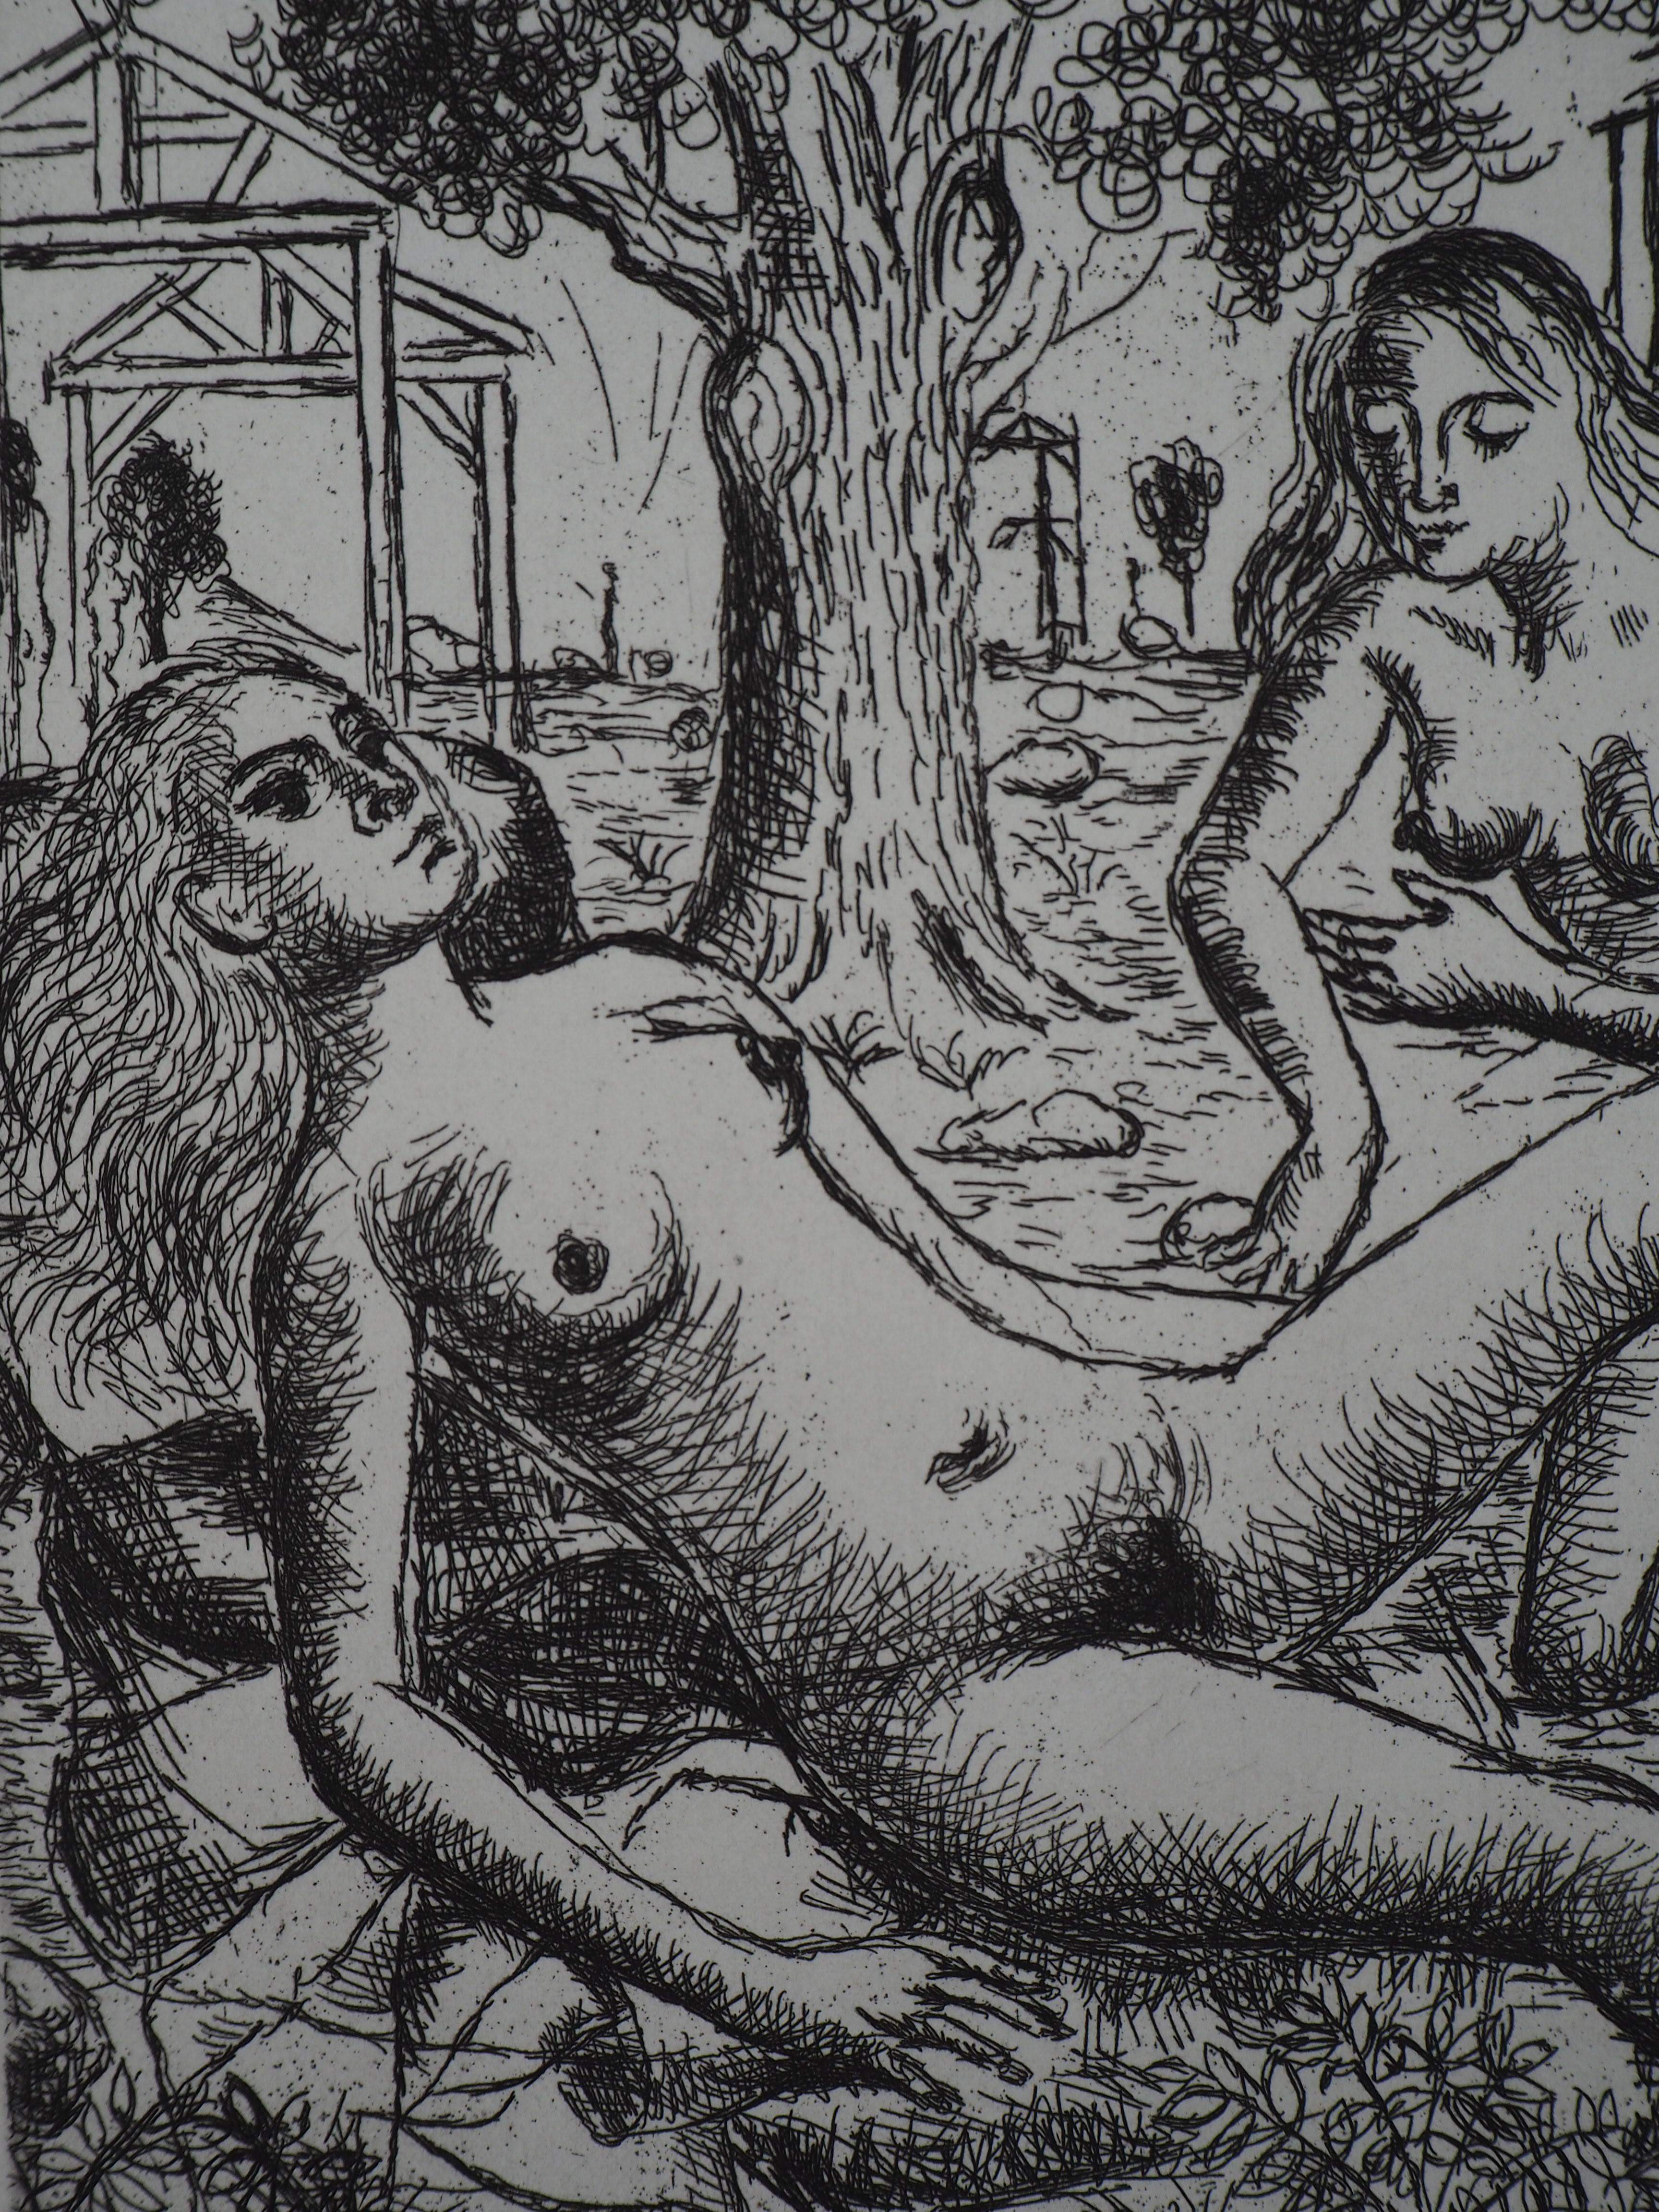 Two Nudes in a Garden - Original signed etching - 1971 - Print by Paul Delvaux